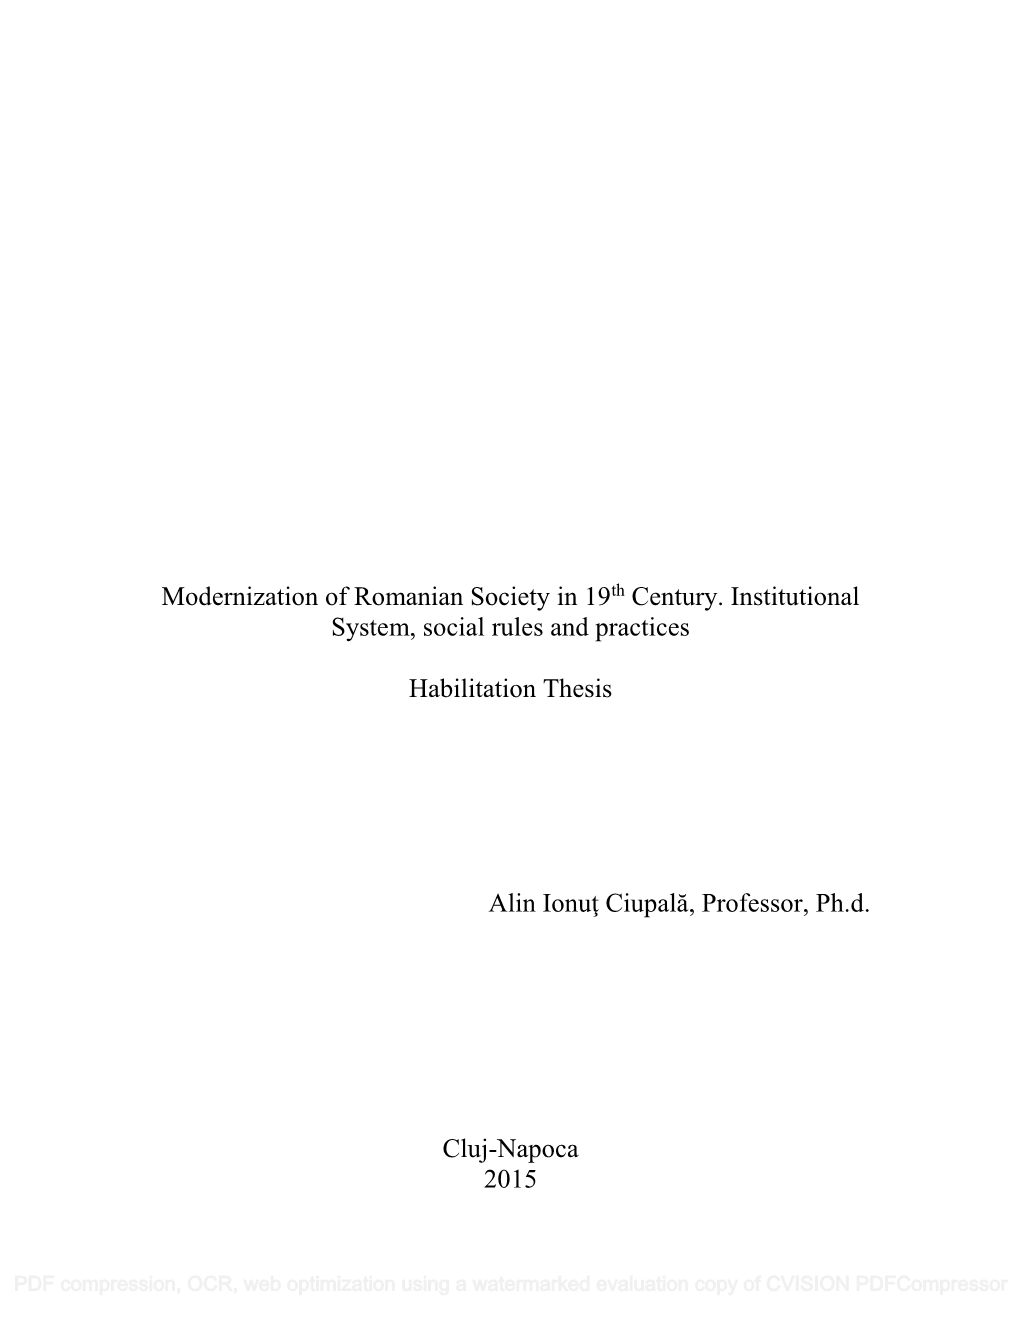 Modernization of Romanian Society in 19Th Century. Institutional System, Social Rules and Practices Habilitation Thesis Alin Io